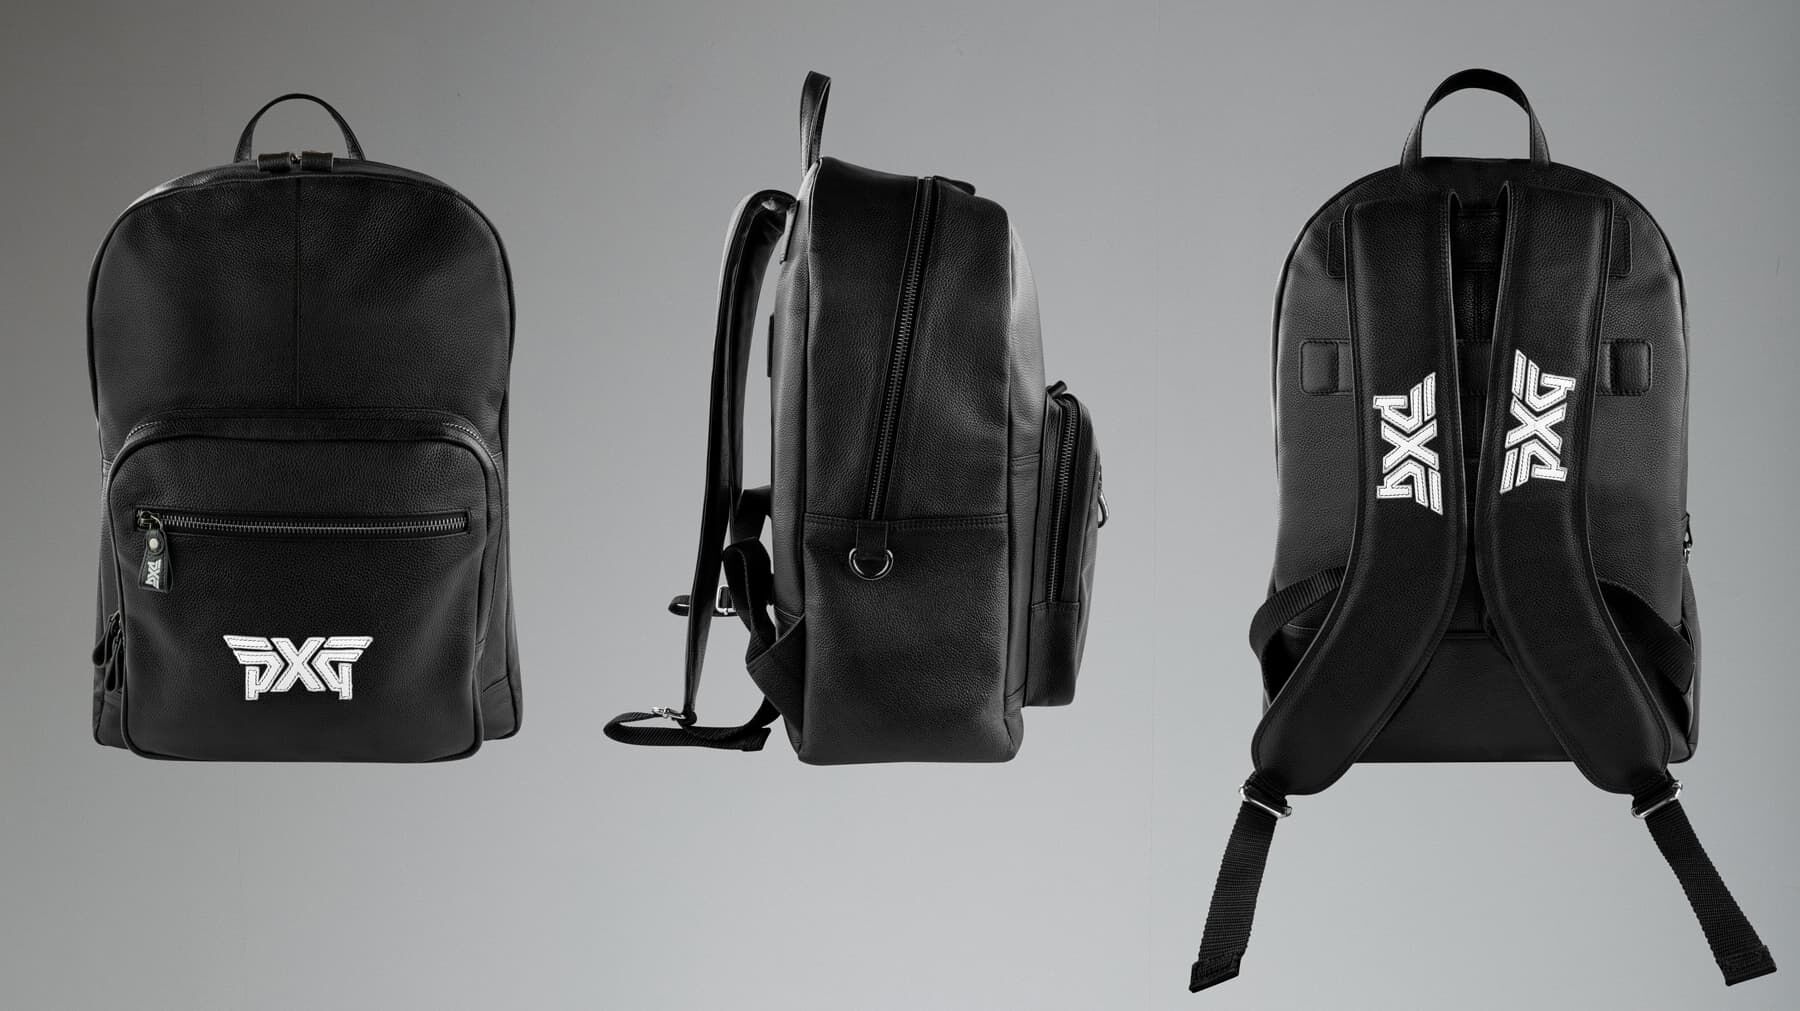 Buy Classic Leather Men's Backpack | PXG UK